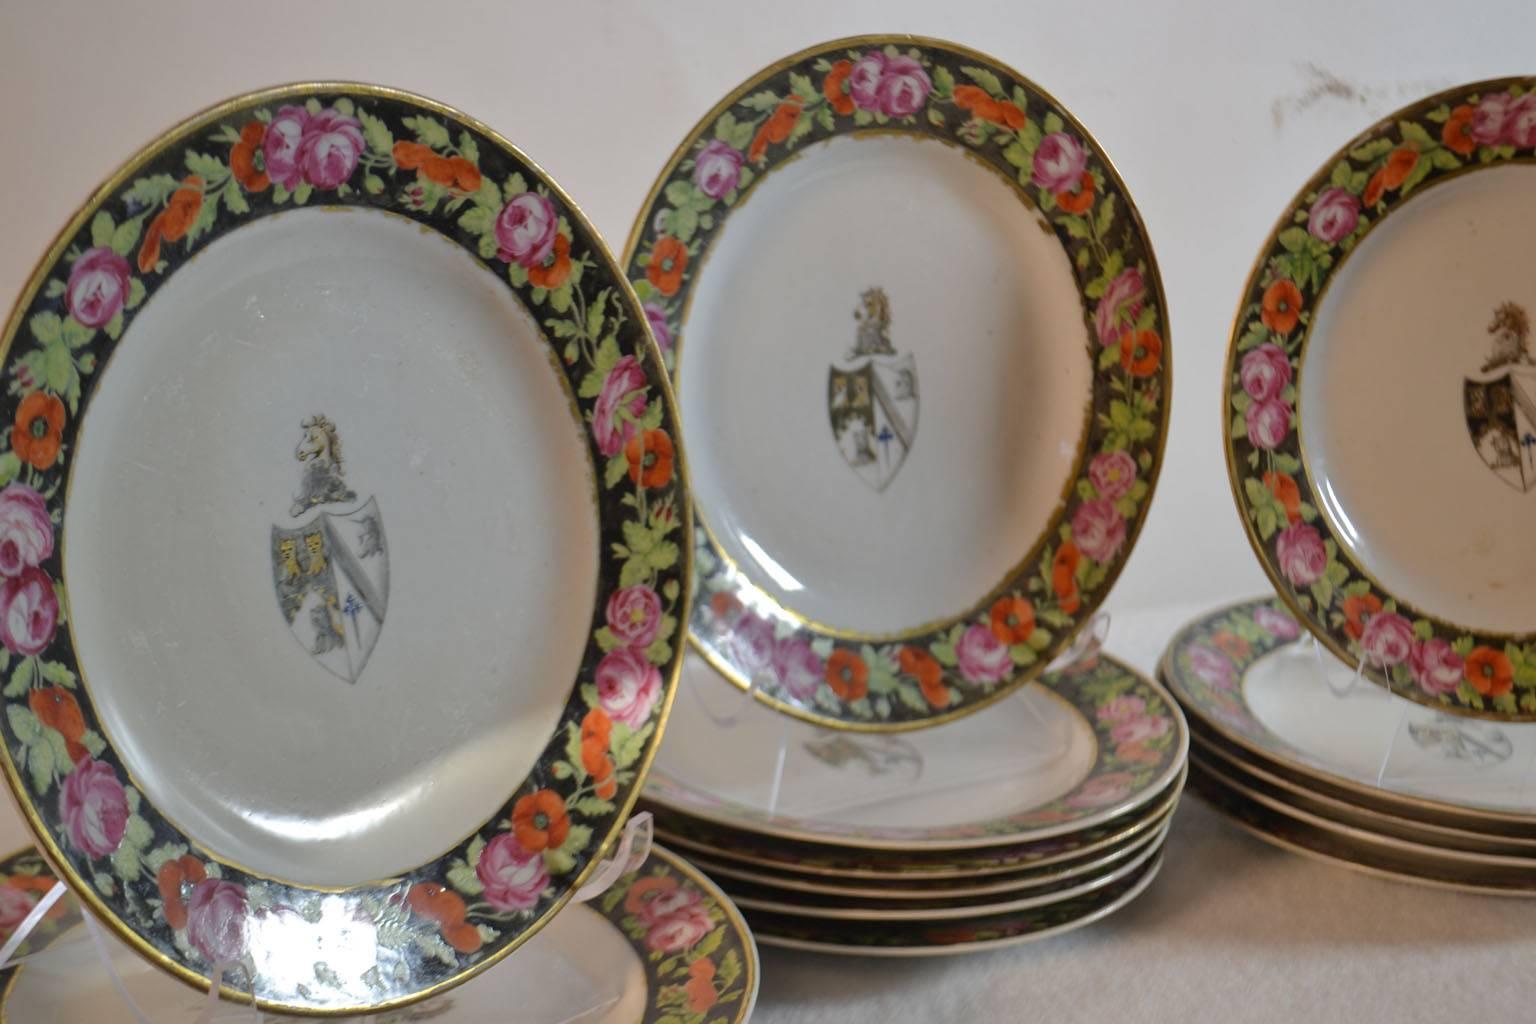 Set of 16 Chinese Export porcelain armorial dessert plates, circa 1800, each plate with a black-ground border of hand-painted roses and decorated with the arms of Smyth of Walsham and Old Buckenham impaling Denison.